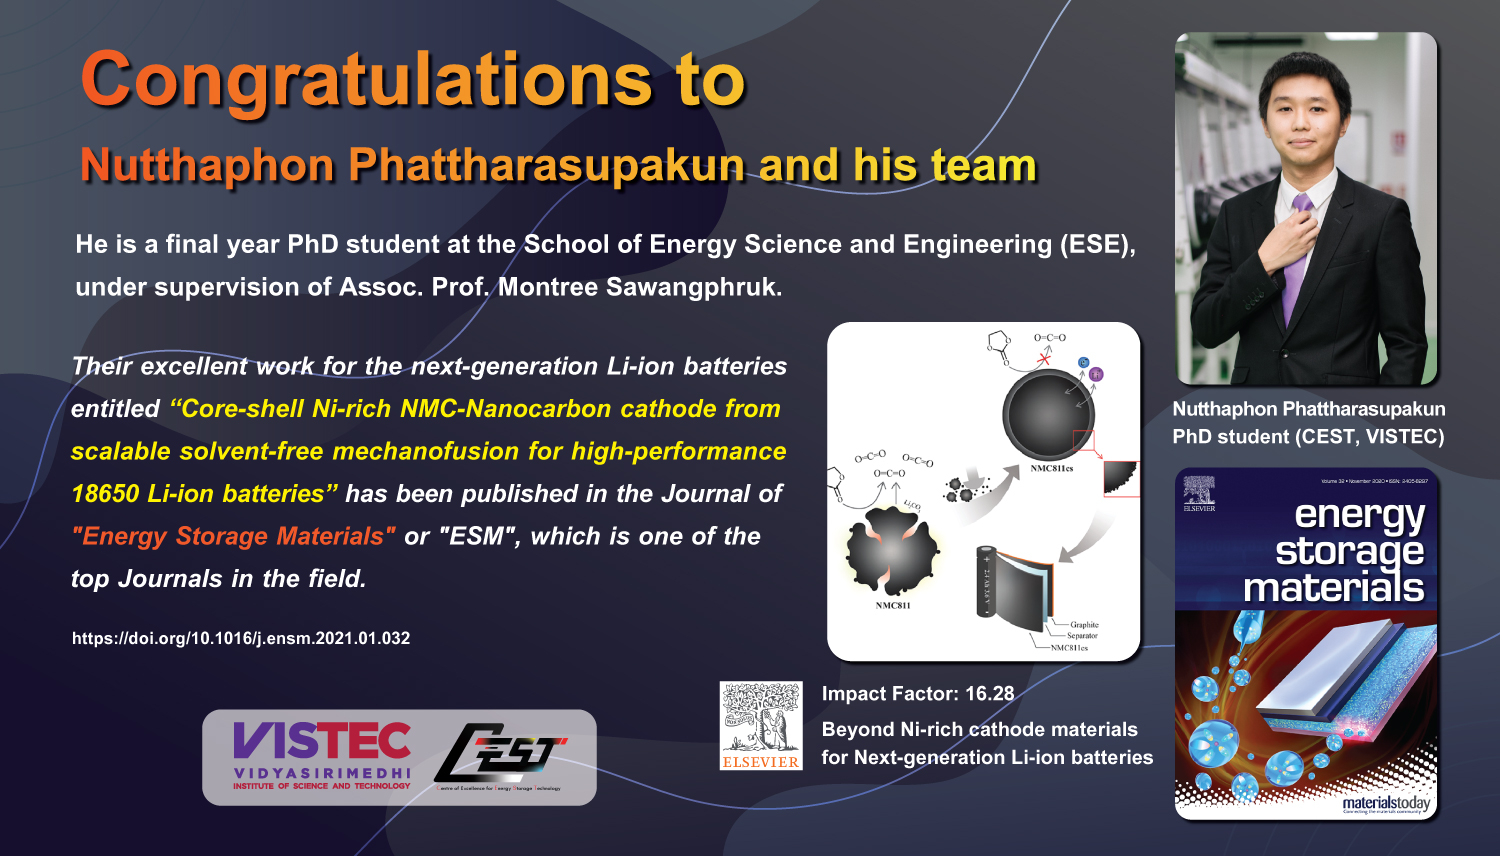 Congratulations to Nutthaphon Phattharasupakun and his team!